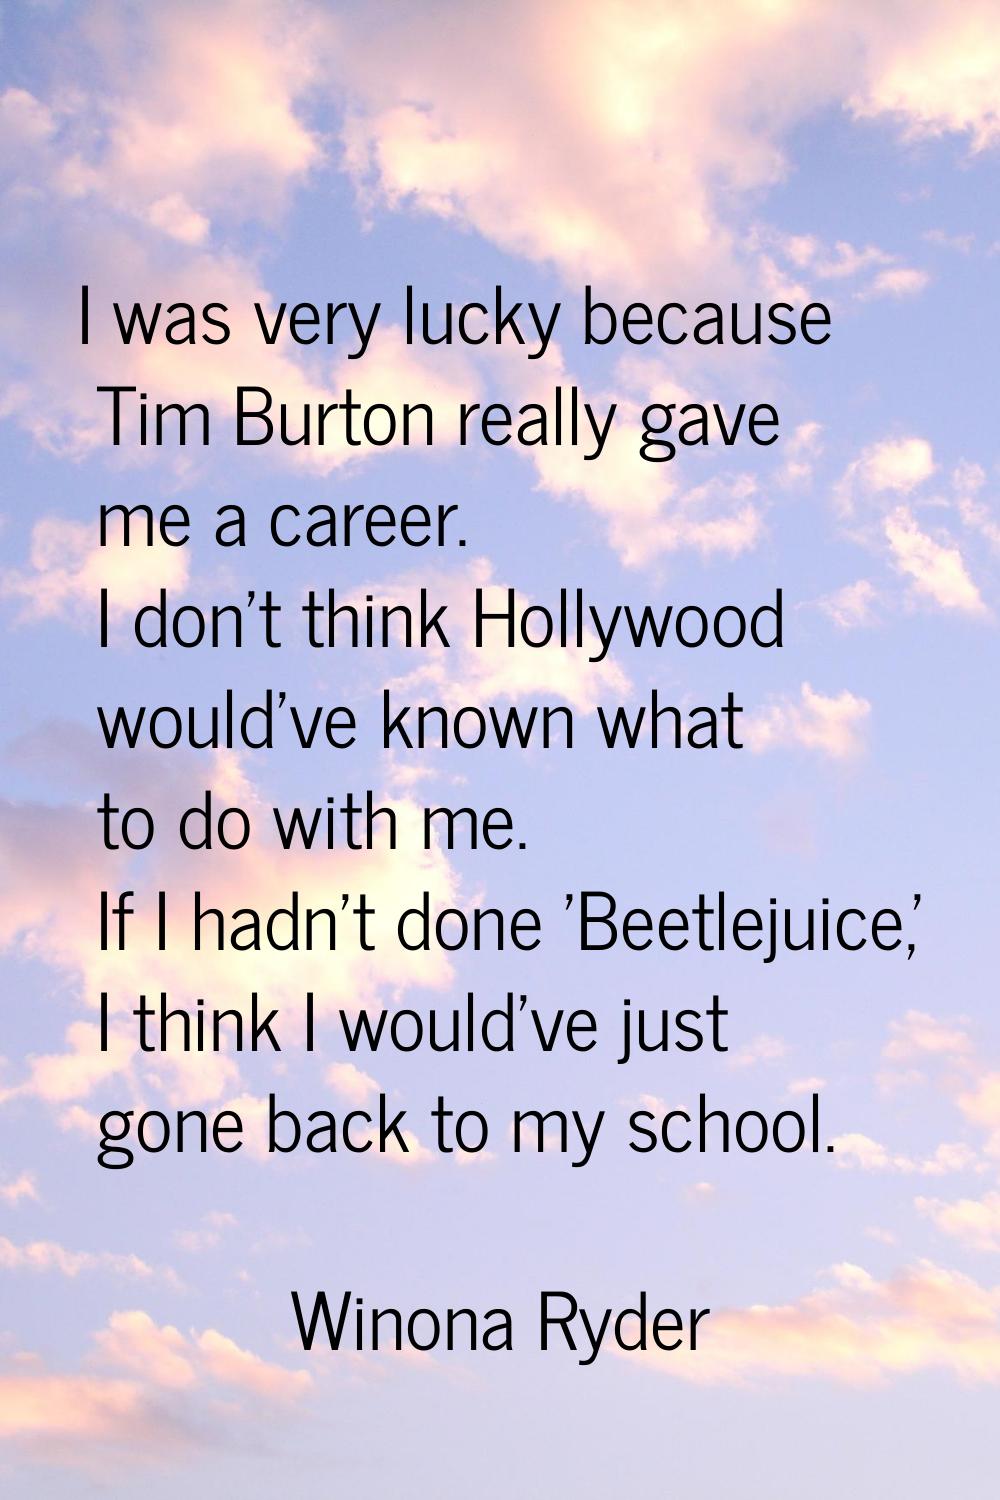 I was very lucky because Tim Burton really gave me a career. I don't think Hollywood would've known